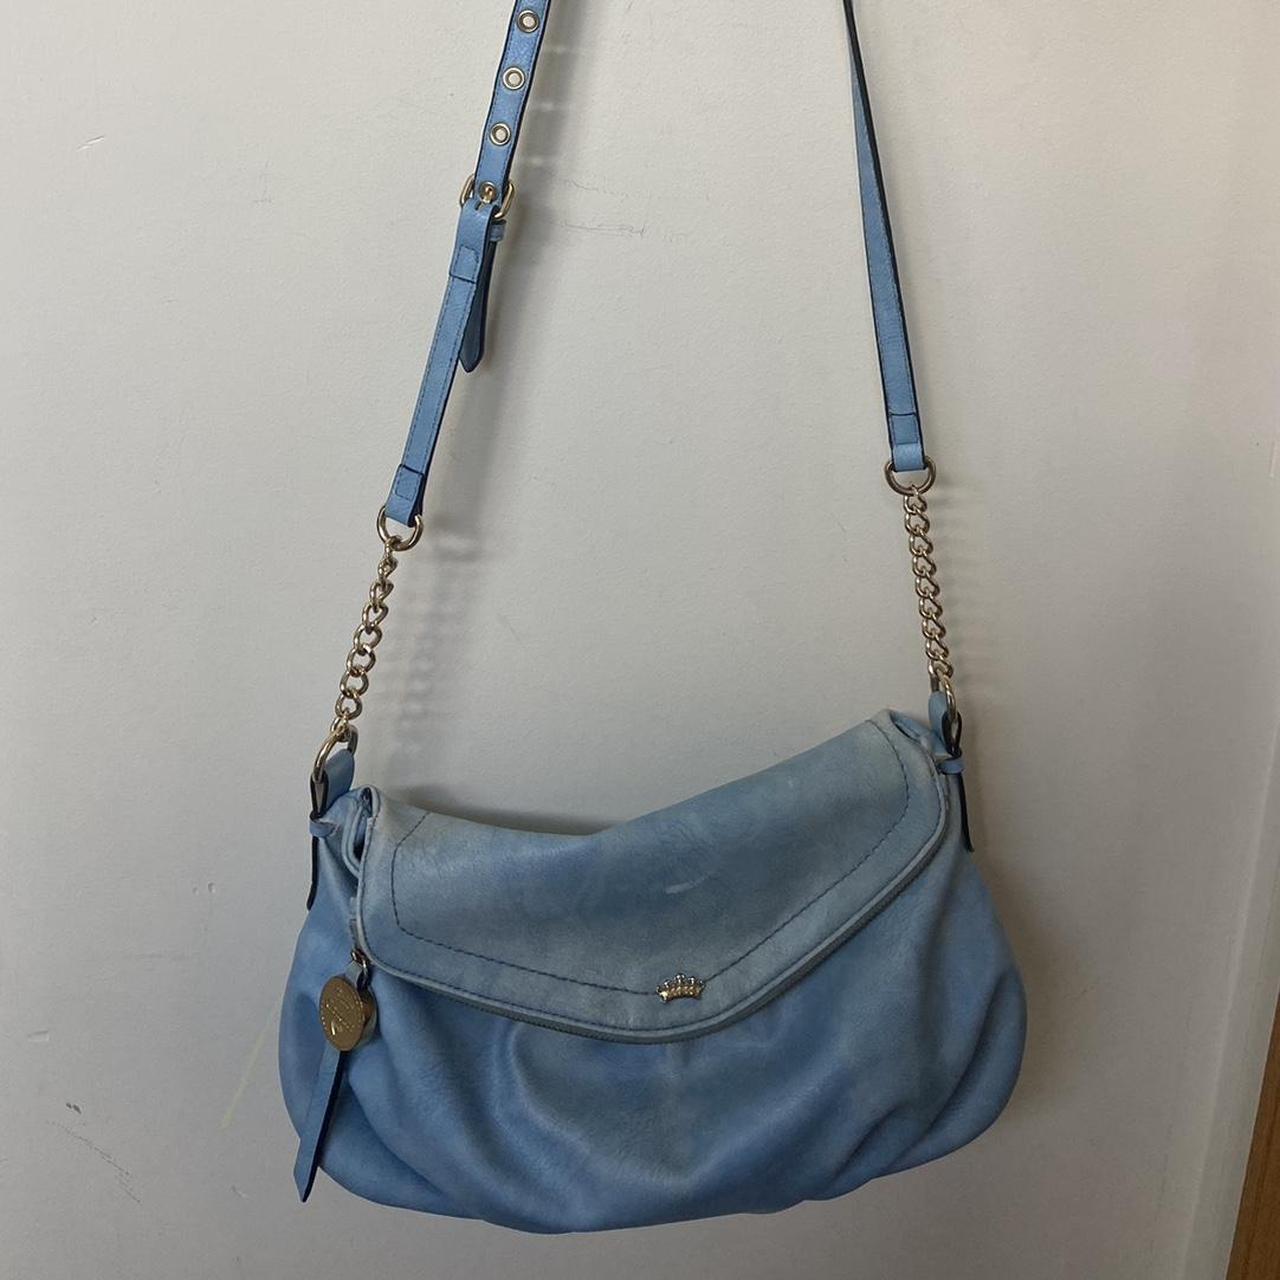 Crossbody Bags for sale in Palm Beach | Facebook Marketplace | Facebook